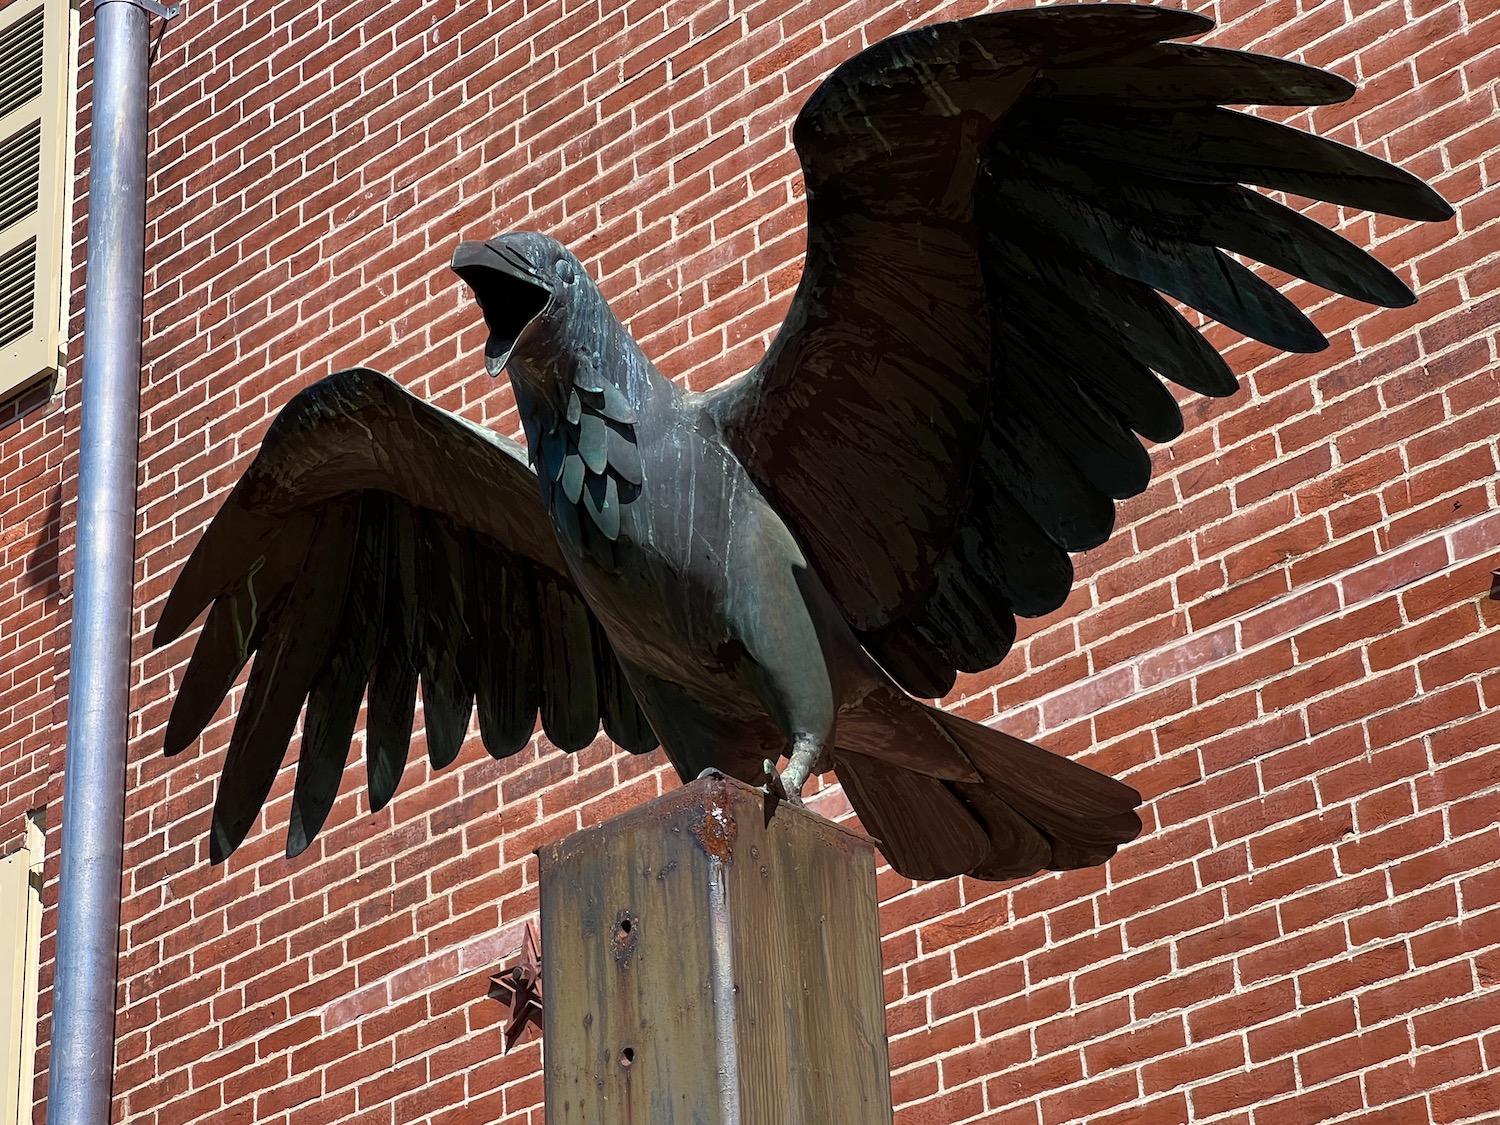 David Caccia's sculpture of a raven casts a shadow over Edgar Allan Poe's former Philadelphia home in certain light.